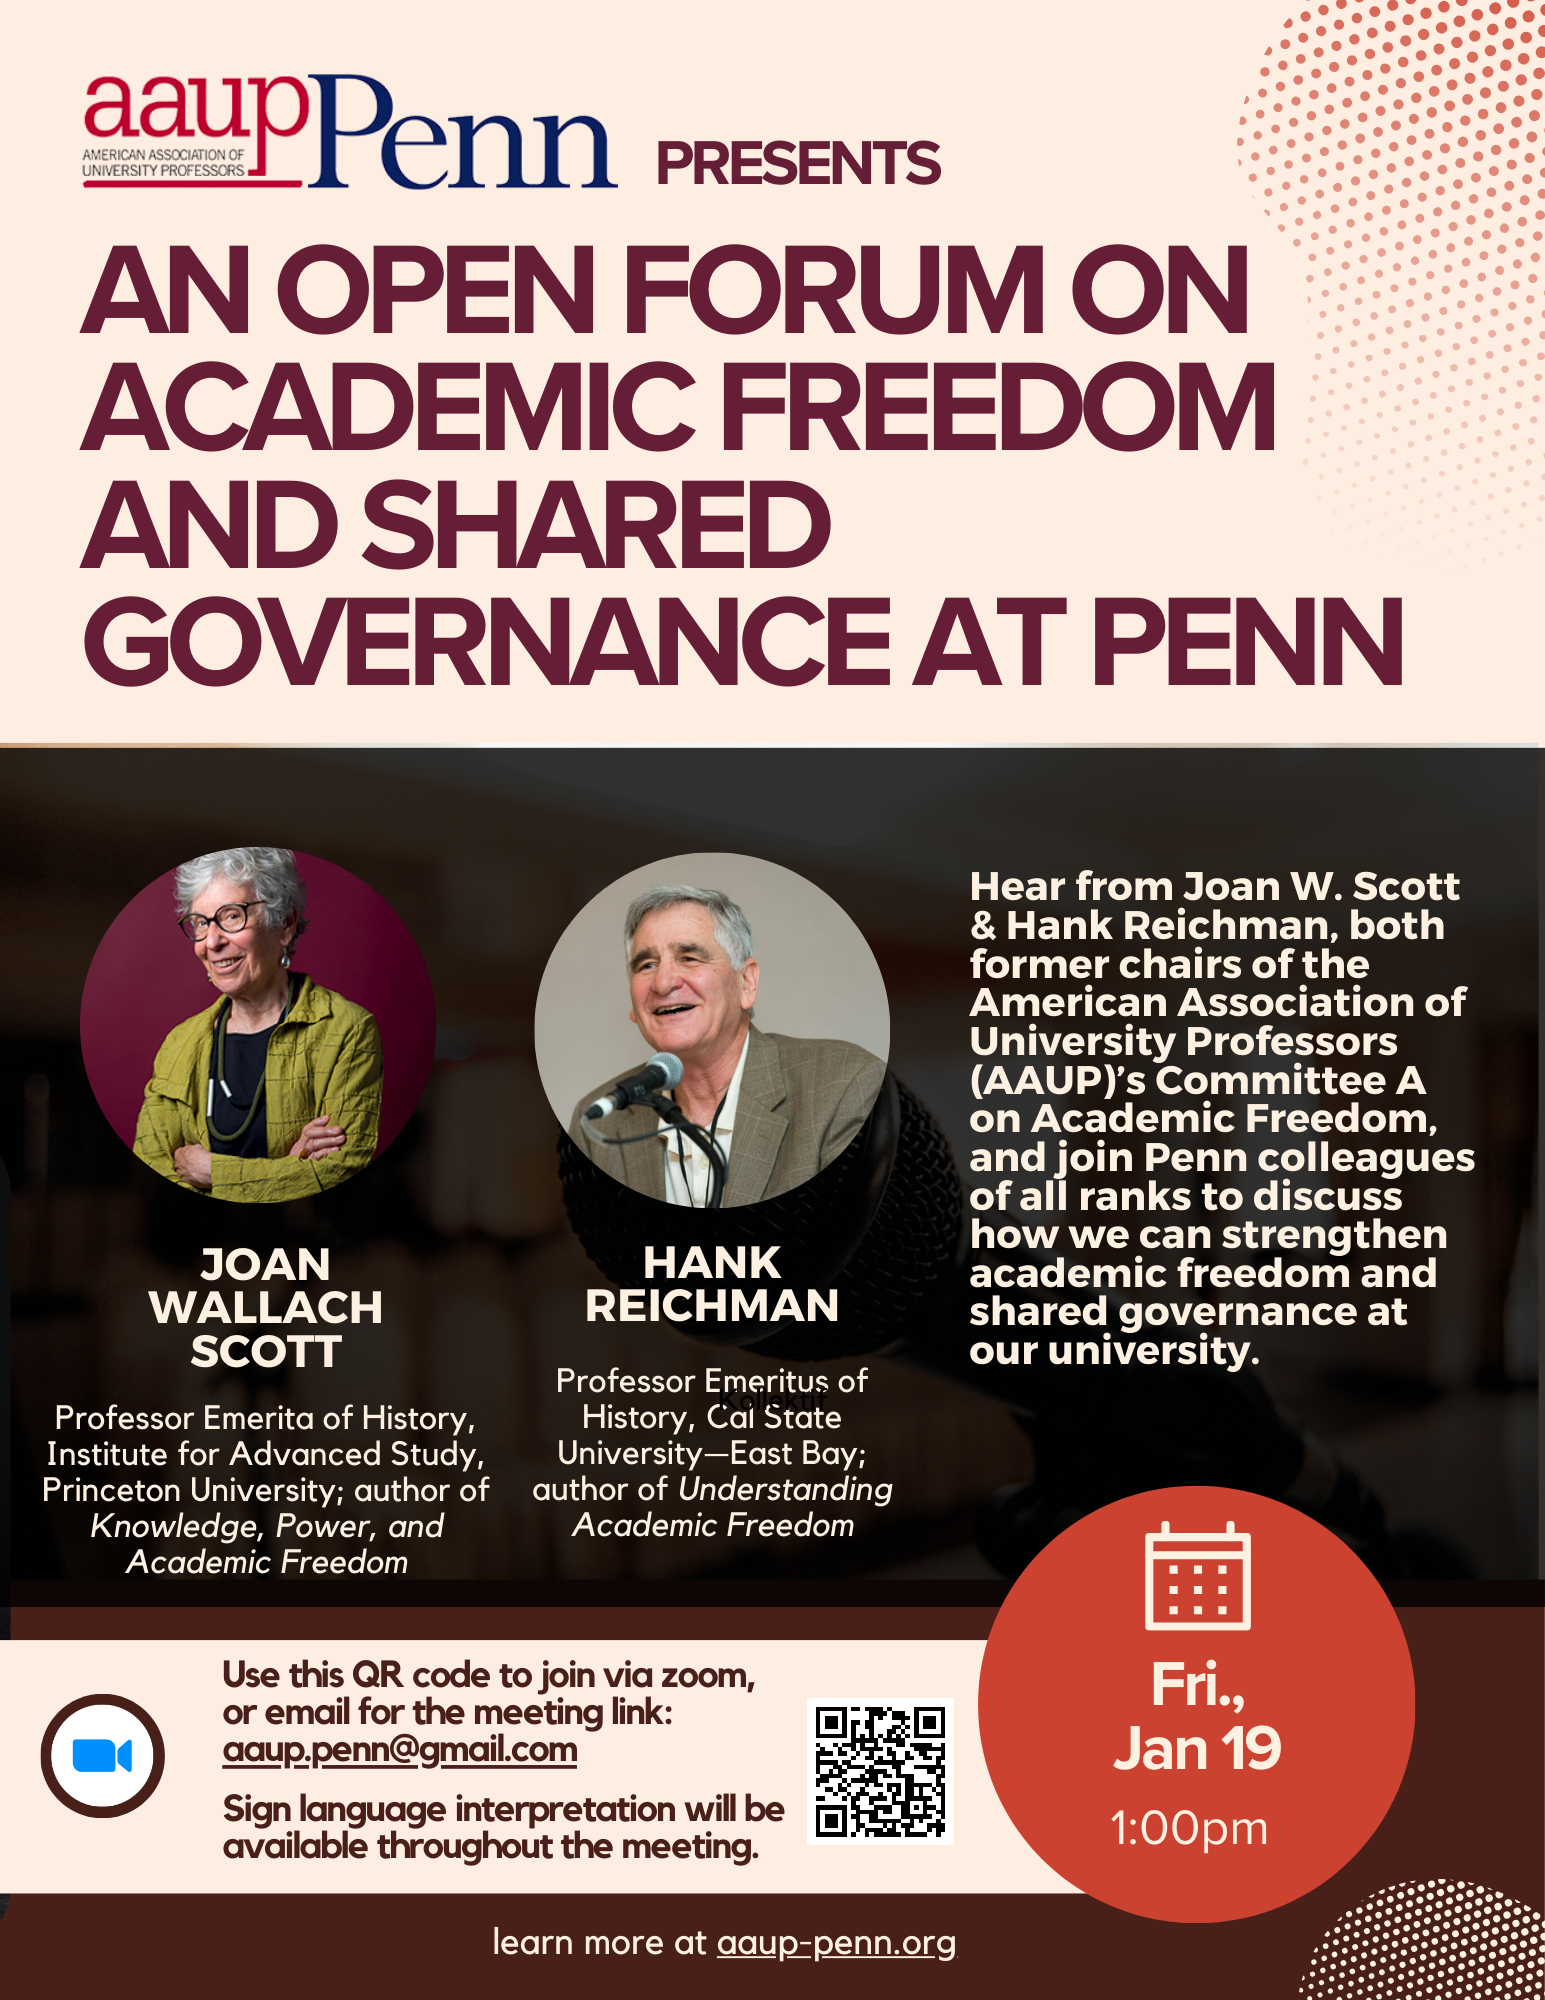 On Jan. 19: Open Forum for the Penn Community on Academic Freedom and Shared Governance, with Joan W. Scott and Hank Reichman